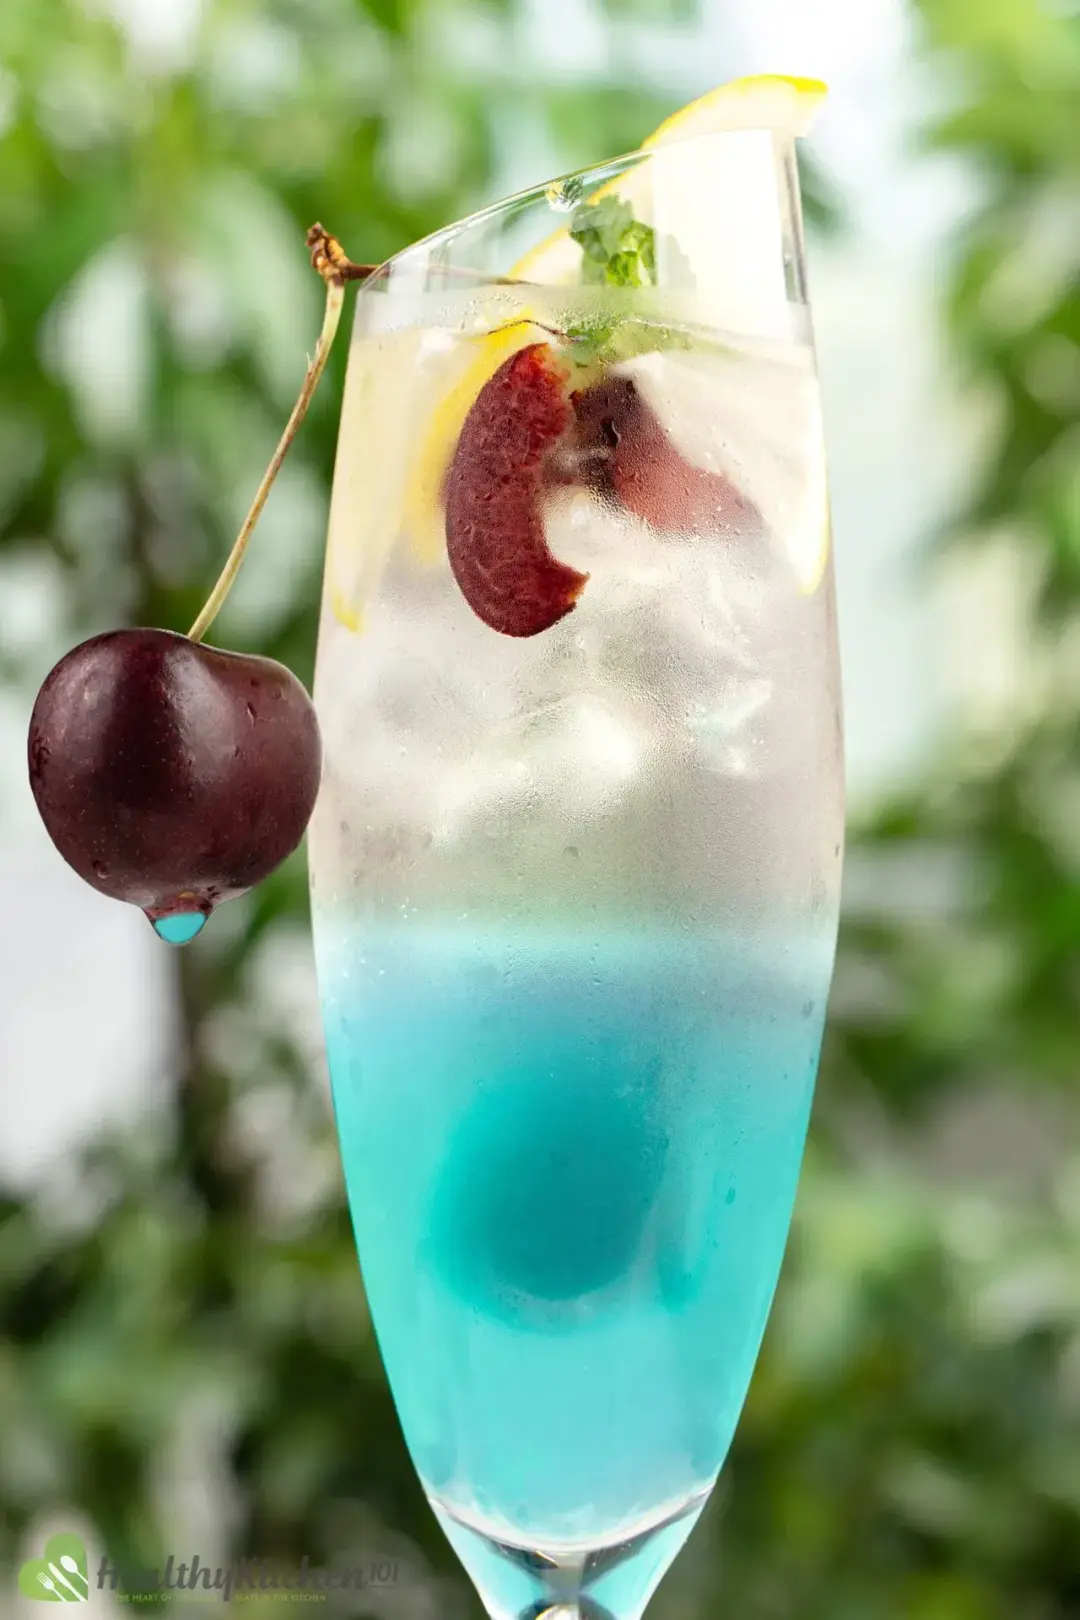 A cocktail glass of a cyan-hued drink, topped with ice, cherries, and mints